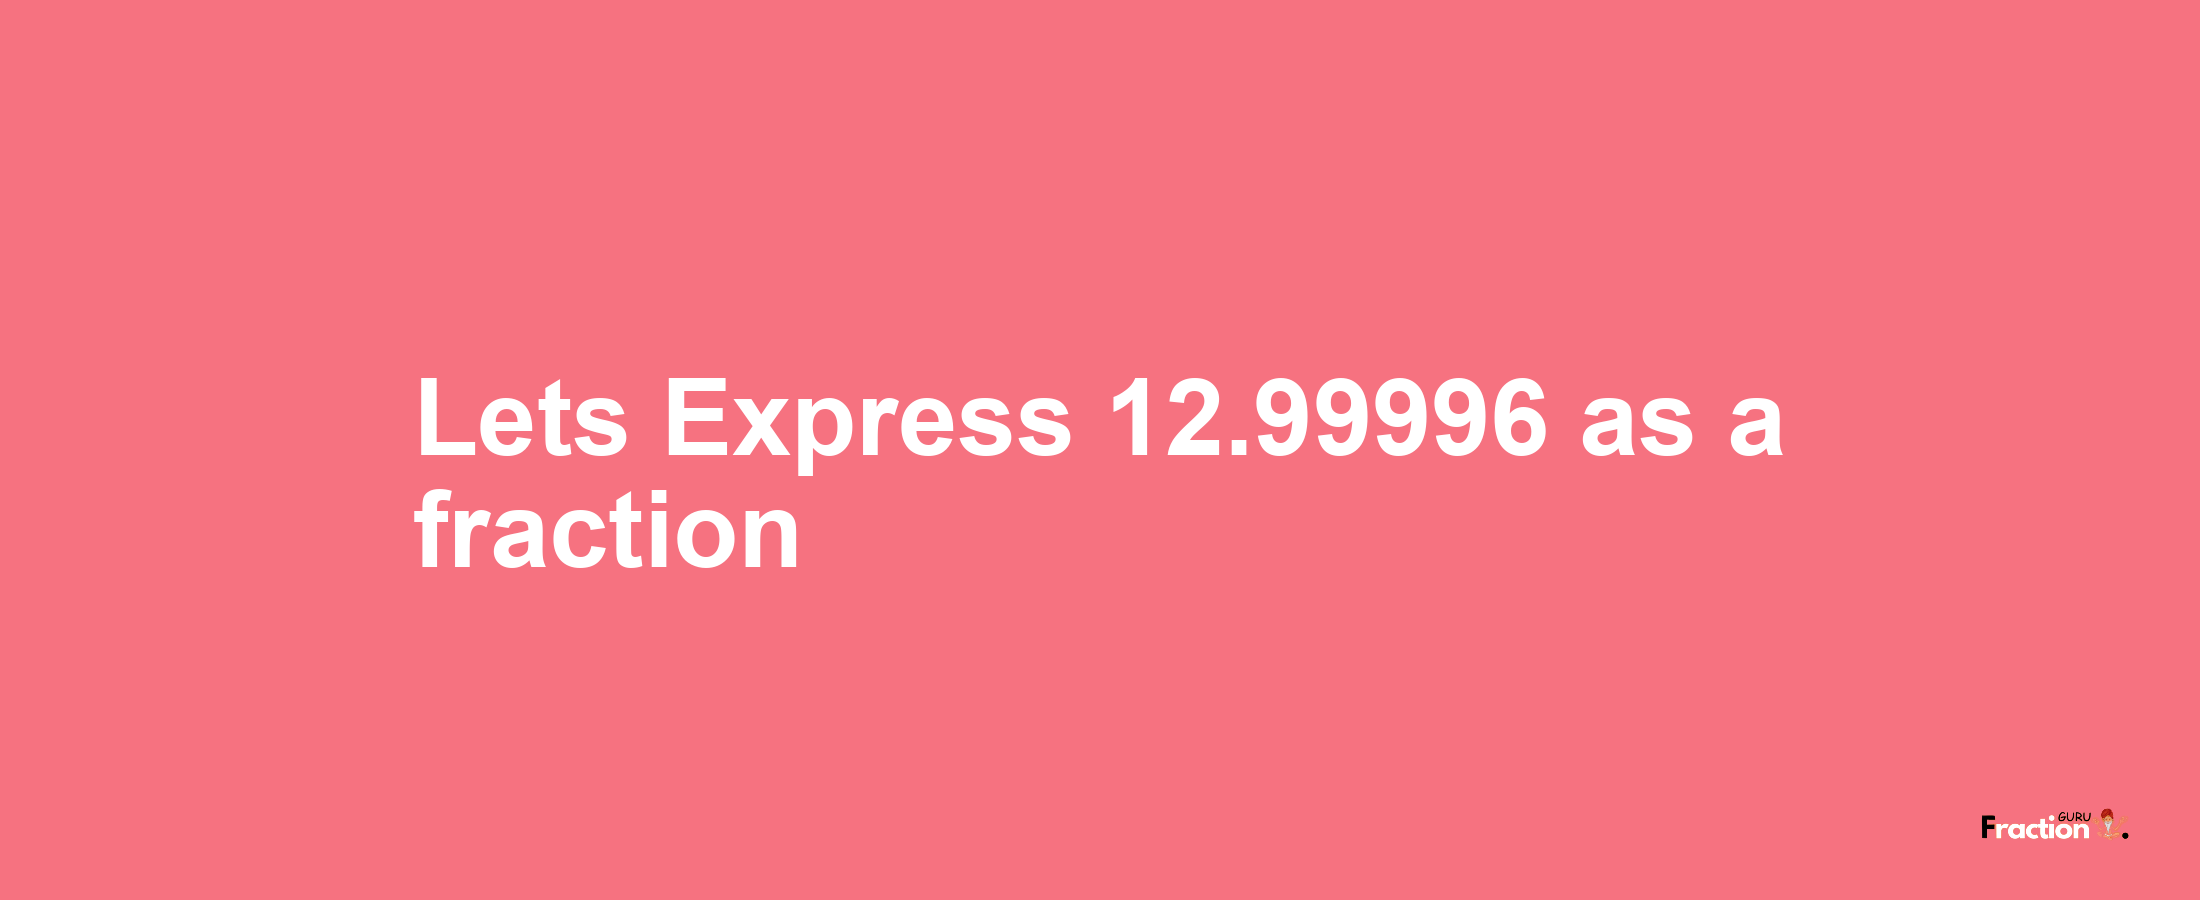 Lets Express 12.99996 as afraction